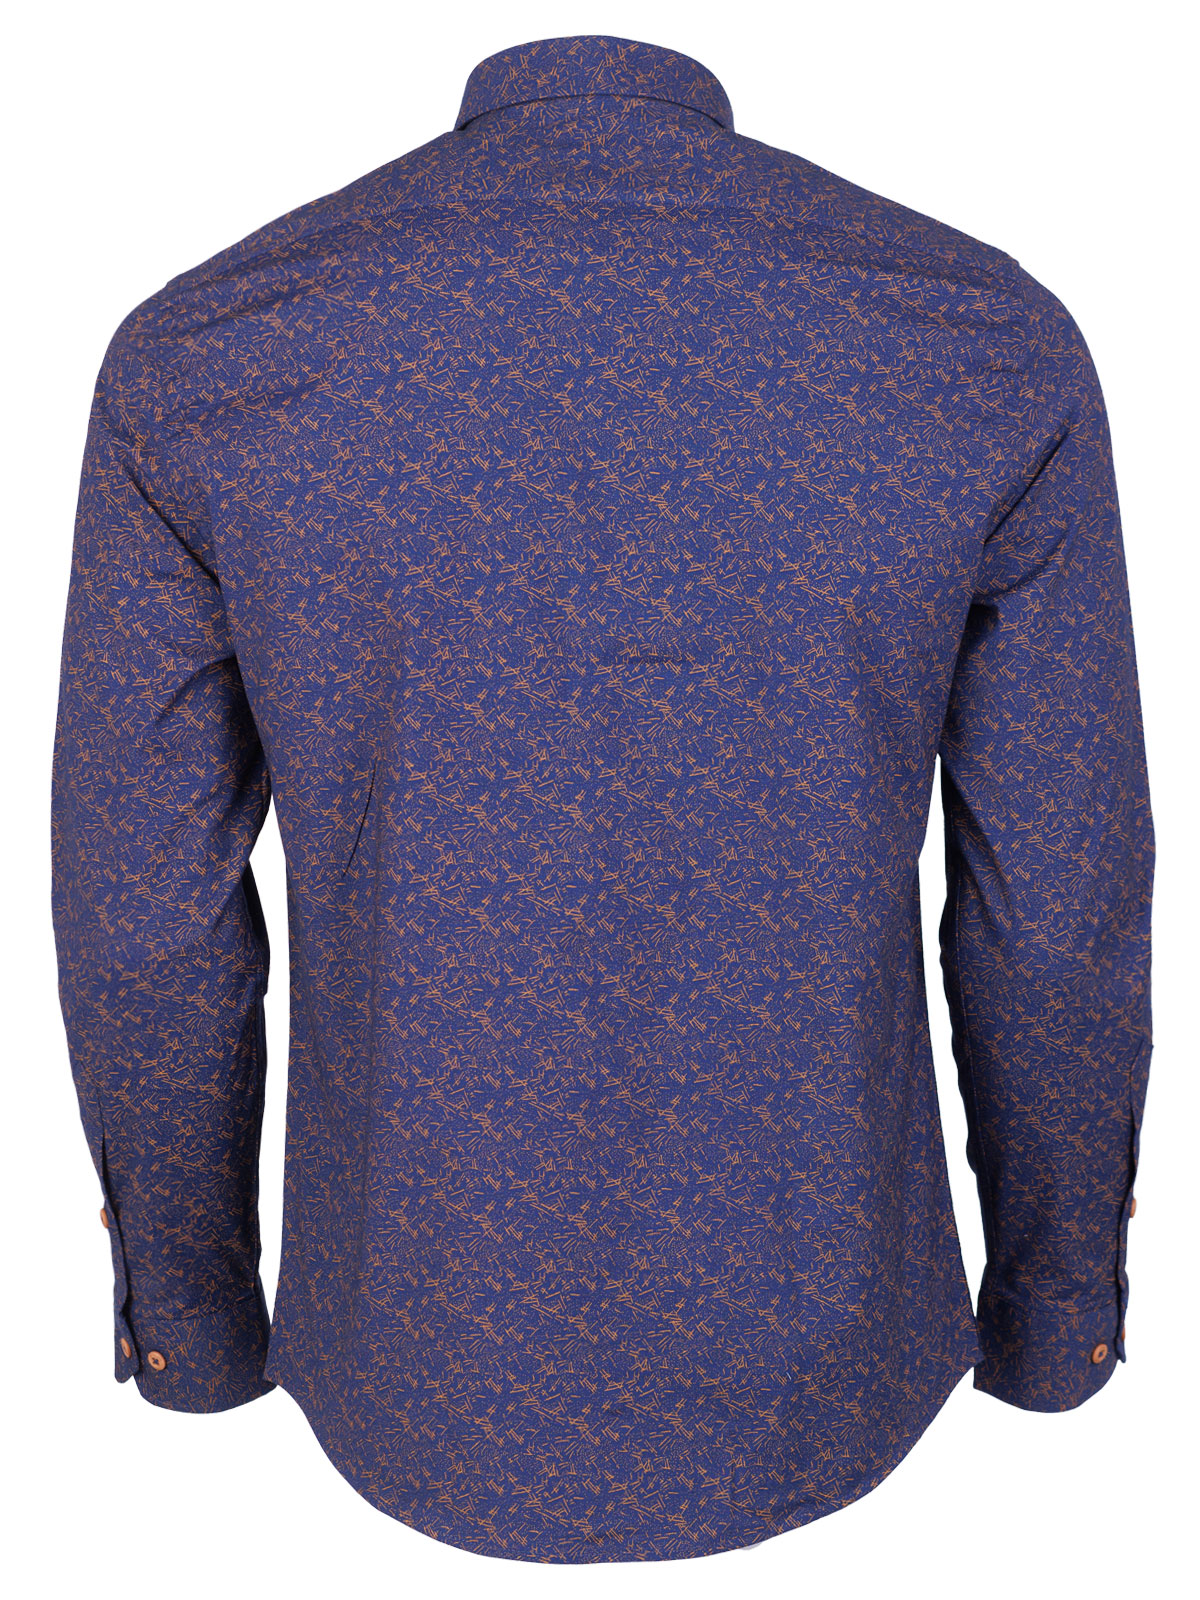 Dark blue shirt with brown figures - 21610 € 44.43 img2